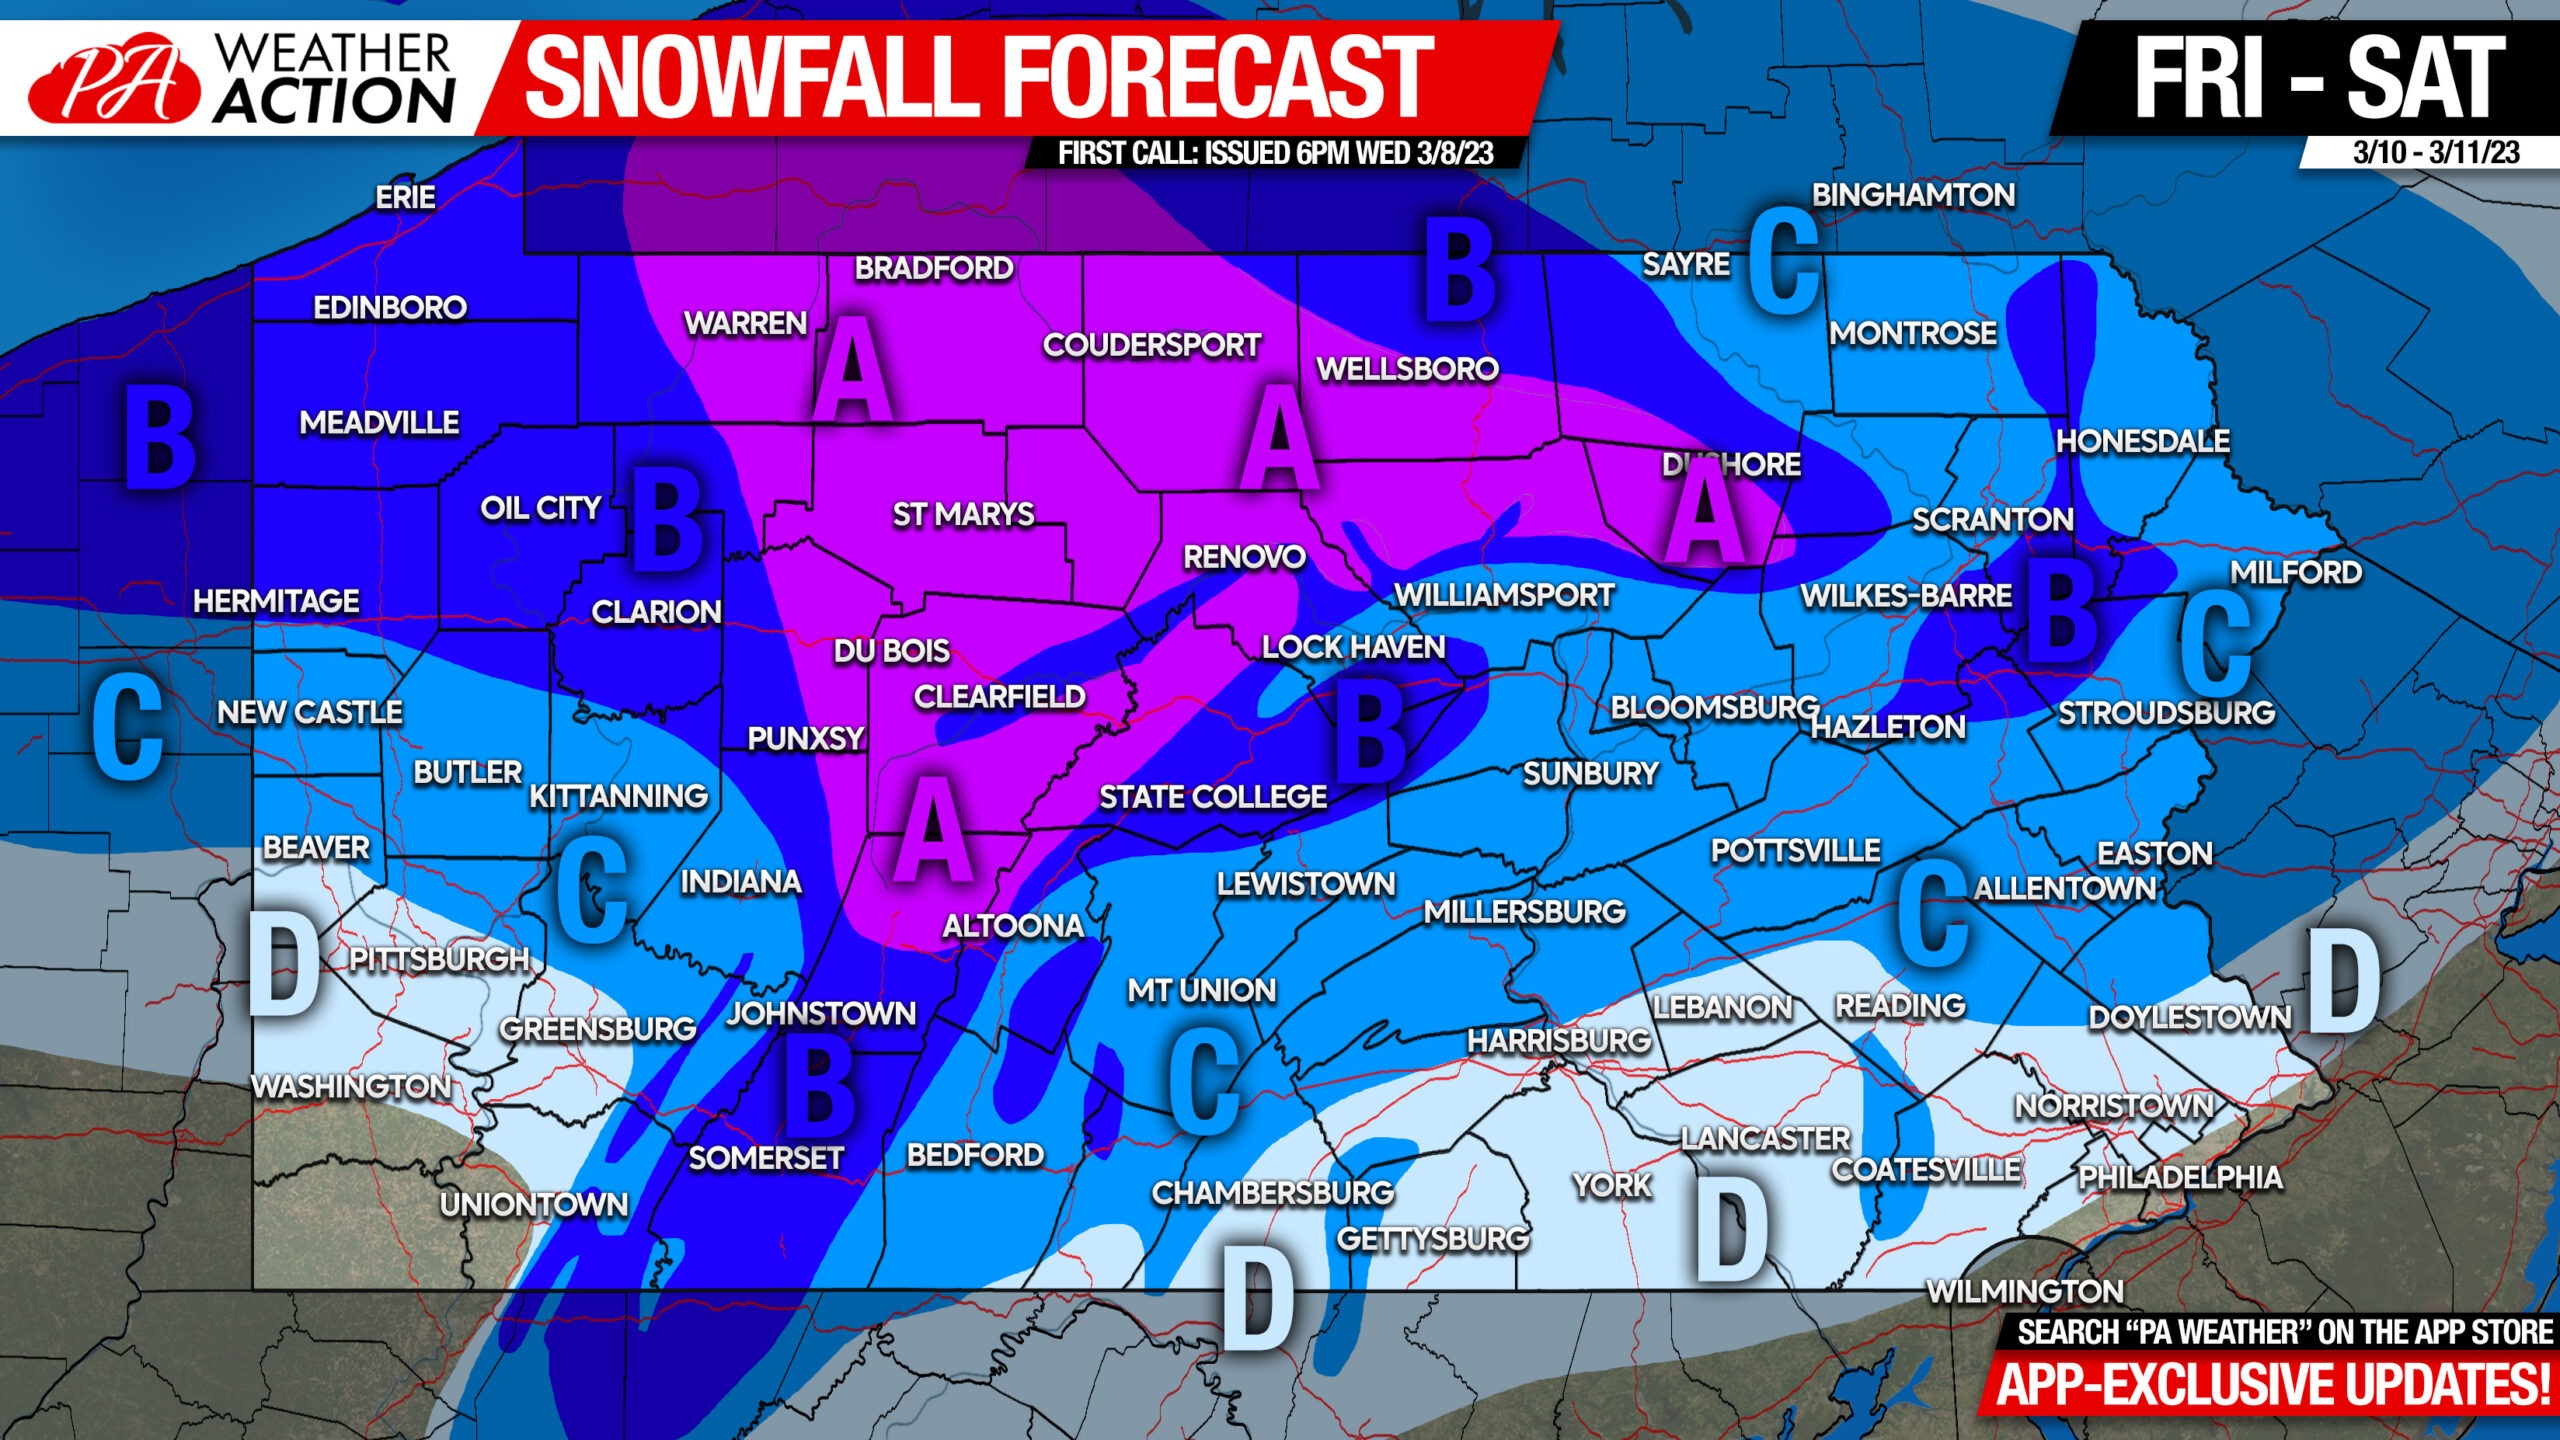 First Call Snowfall Forecast for Friday - Saturday's Winter Storm